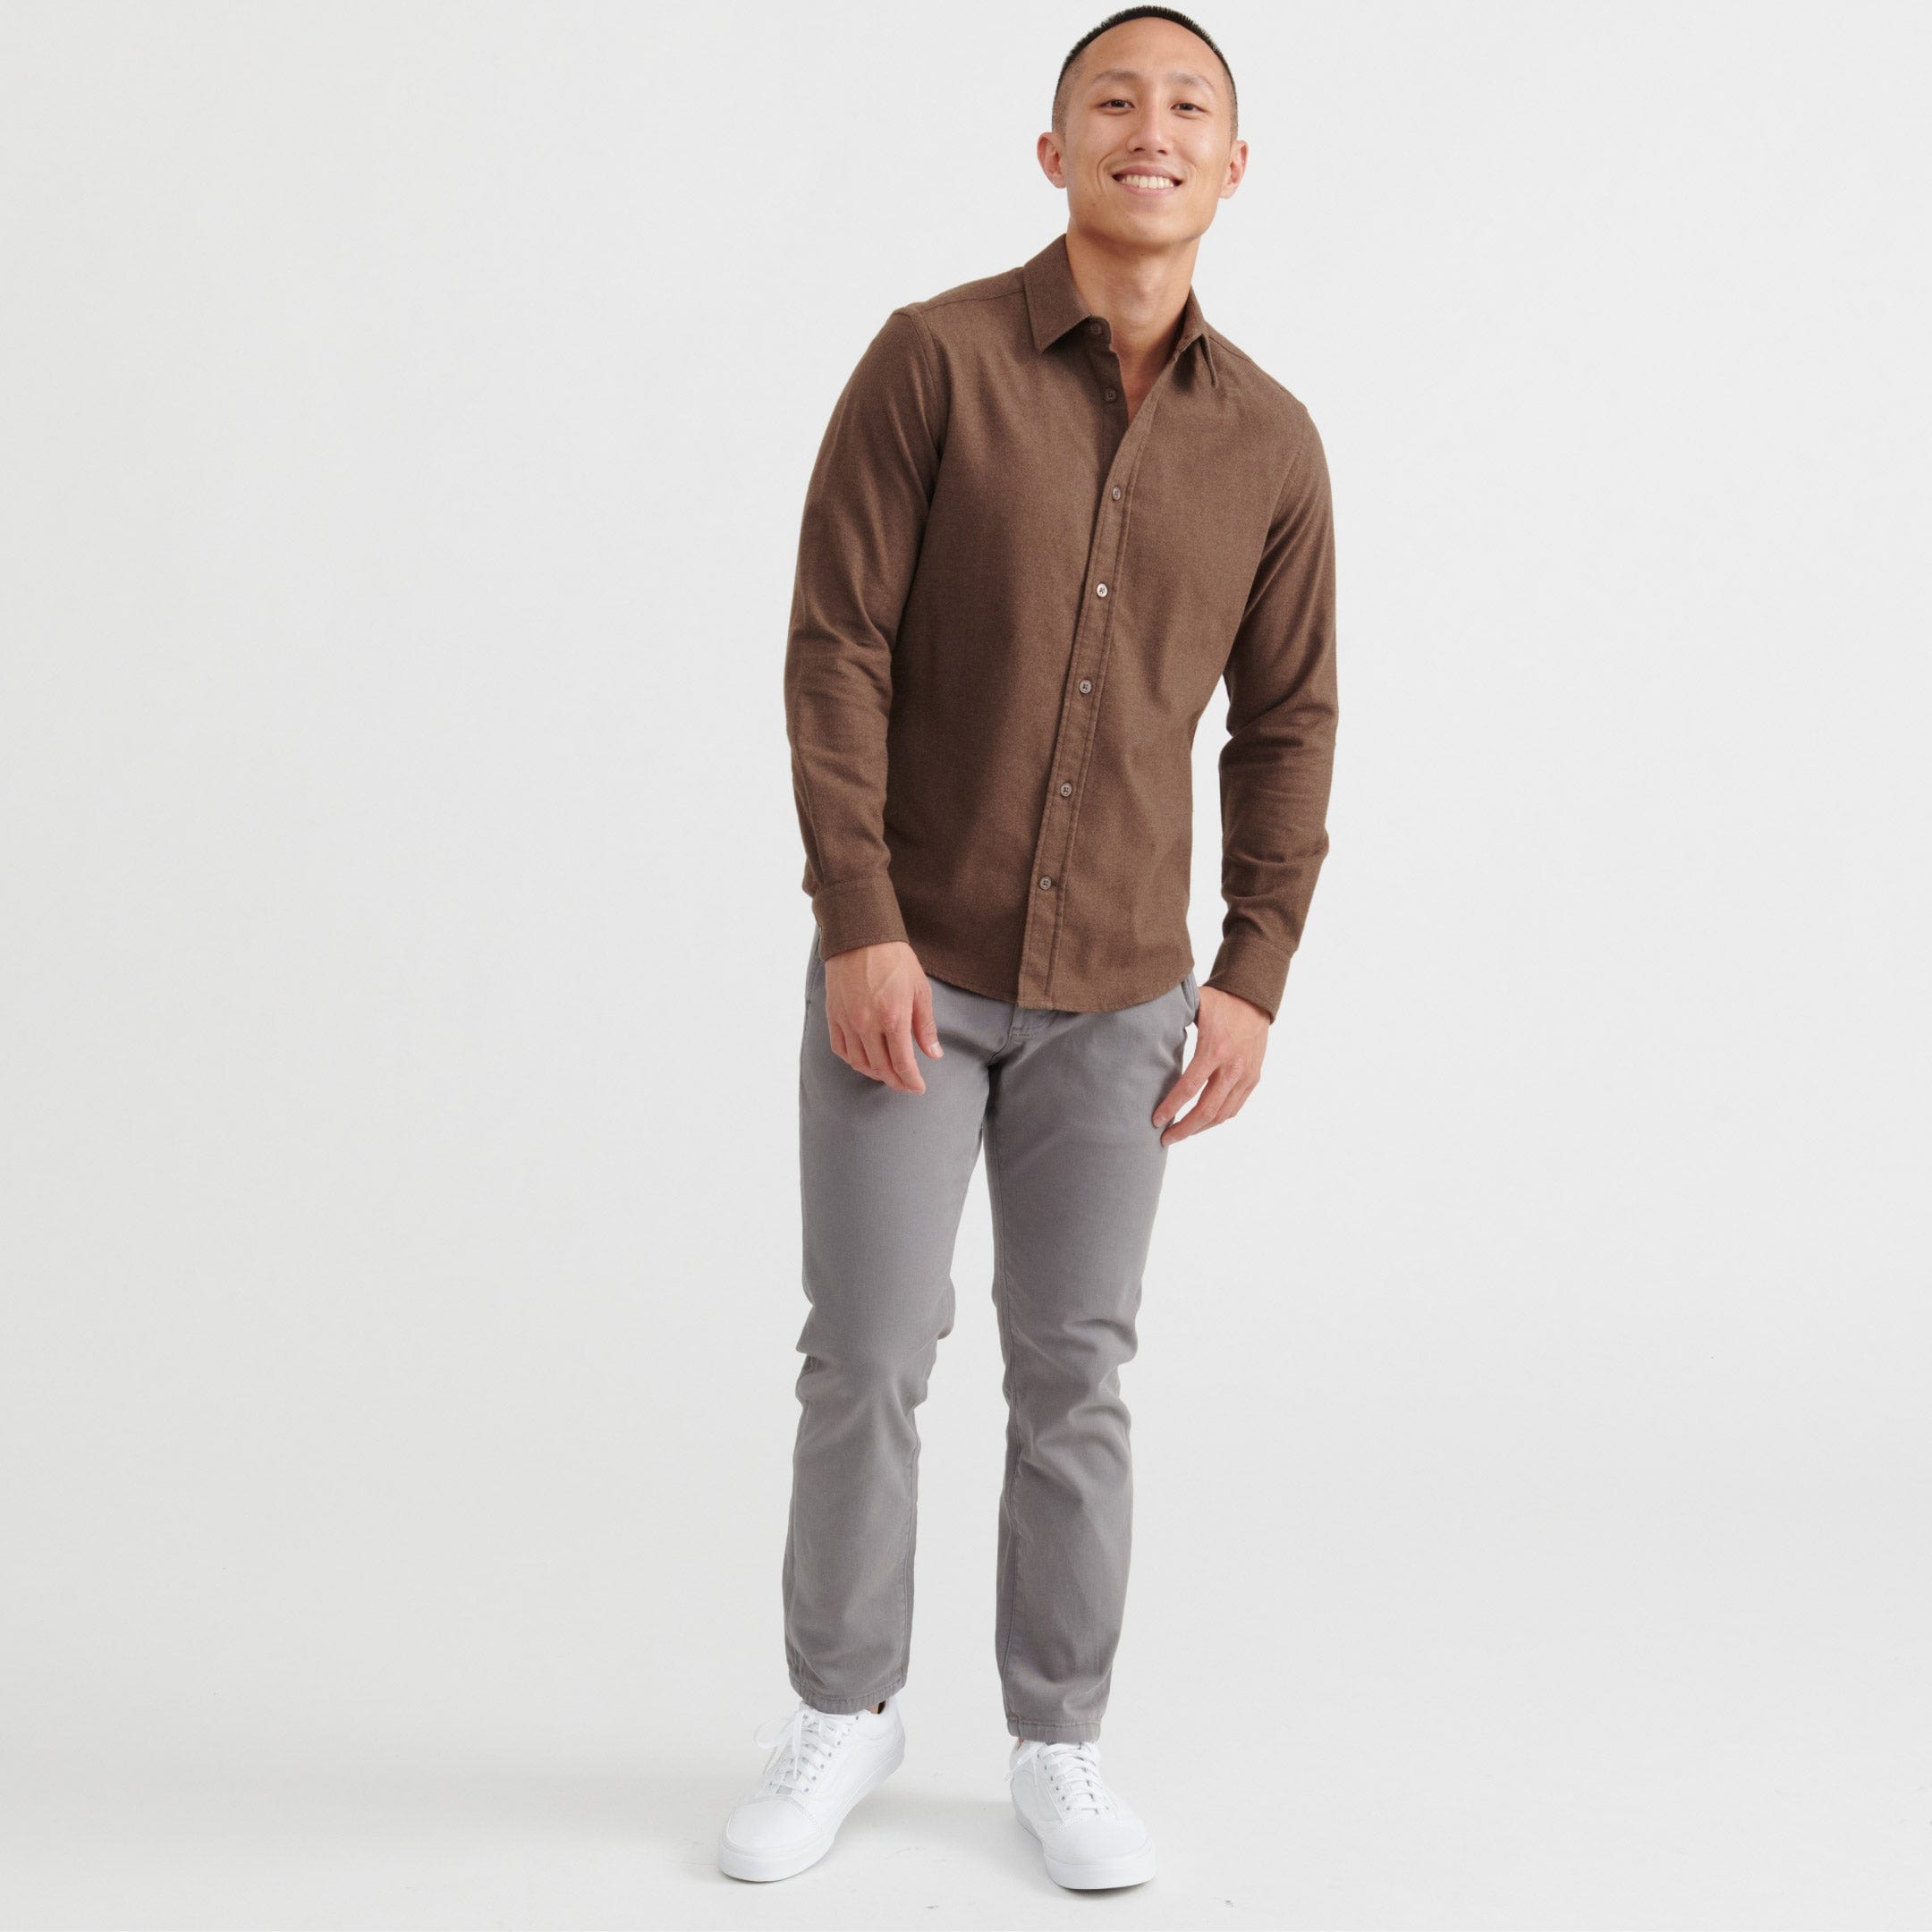 White Cotton Tops With Brown Pants Set – Affluent Choices